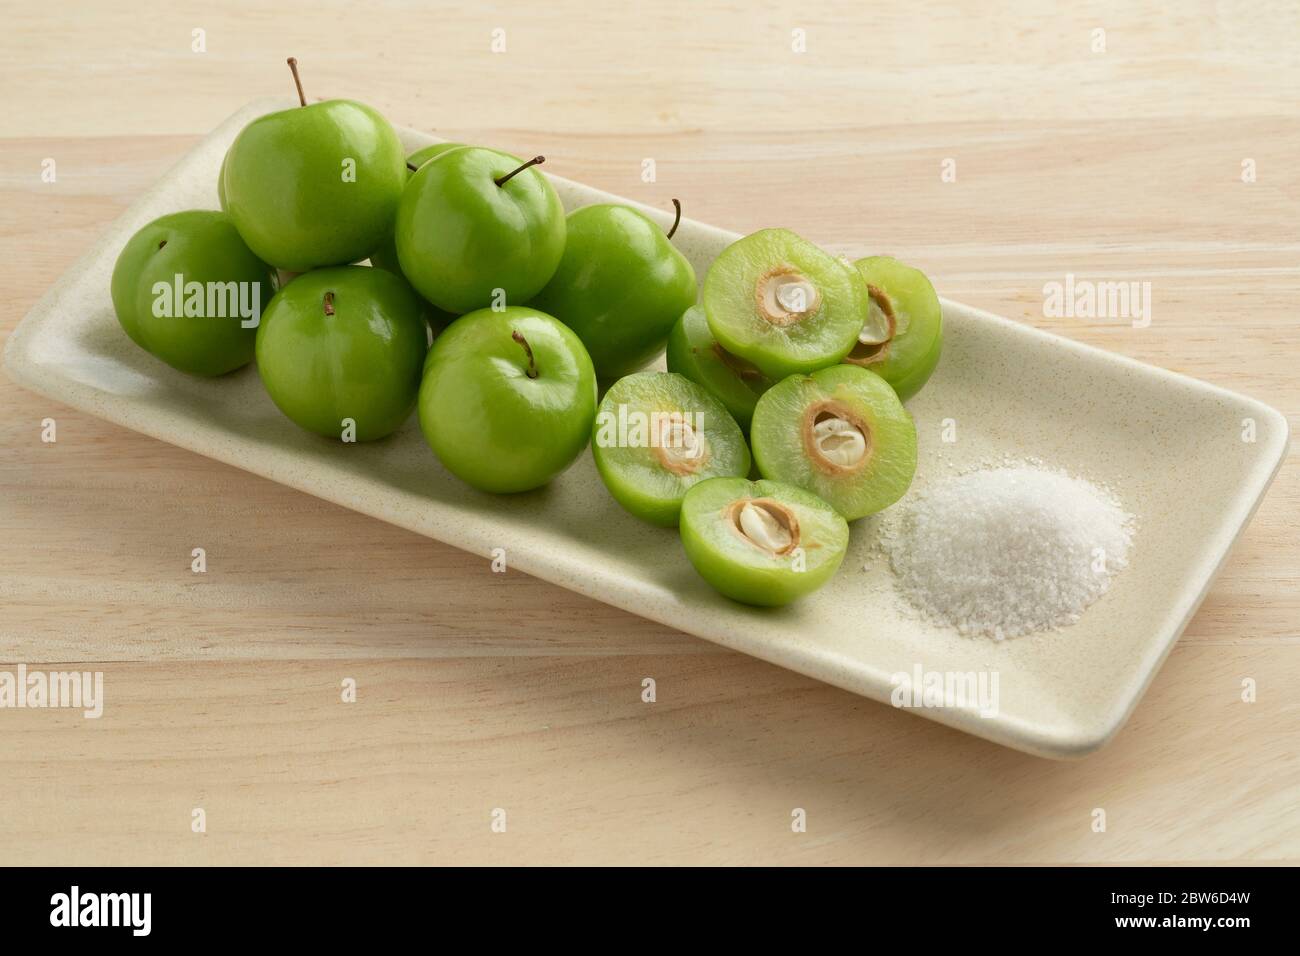 Dish with fresh green whole and half Can Erik plums and a bowl with salt Stock Photo